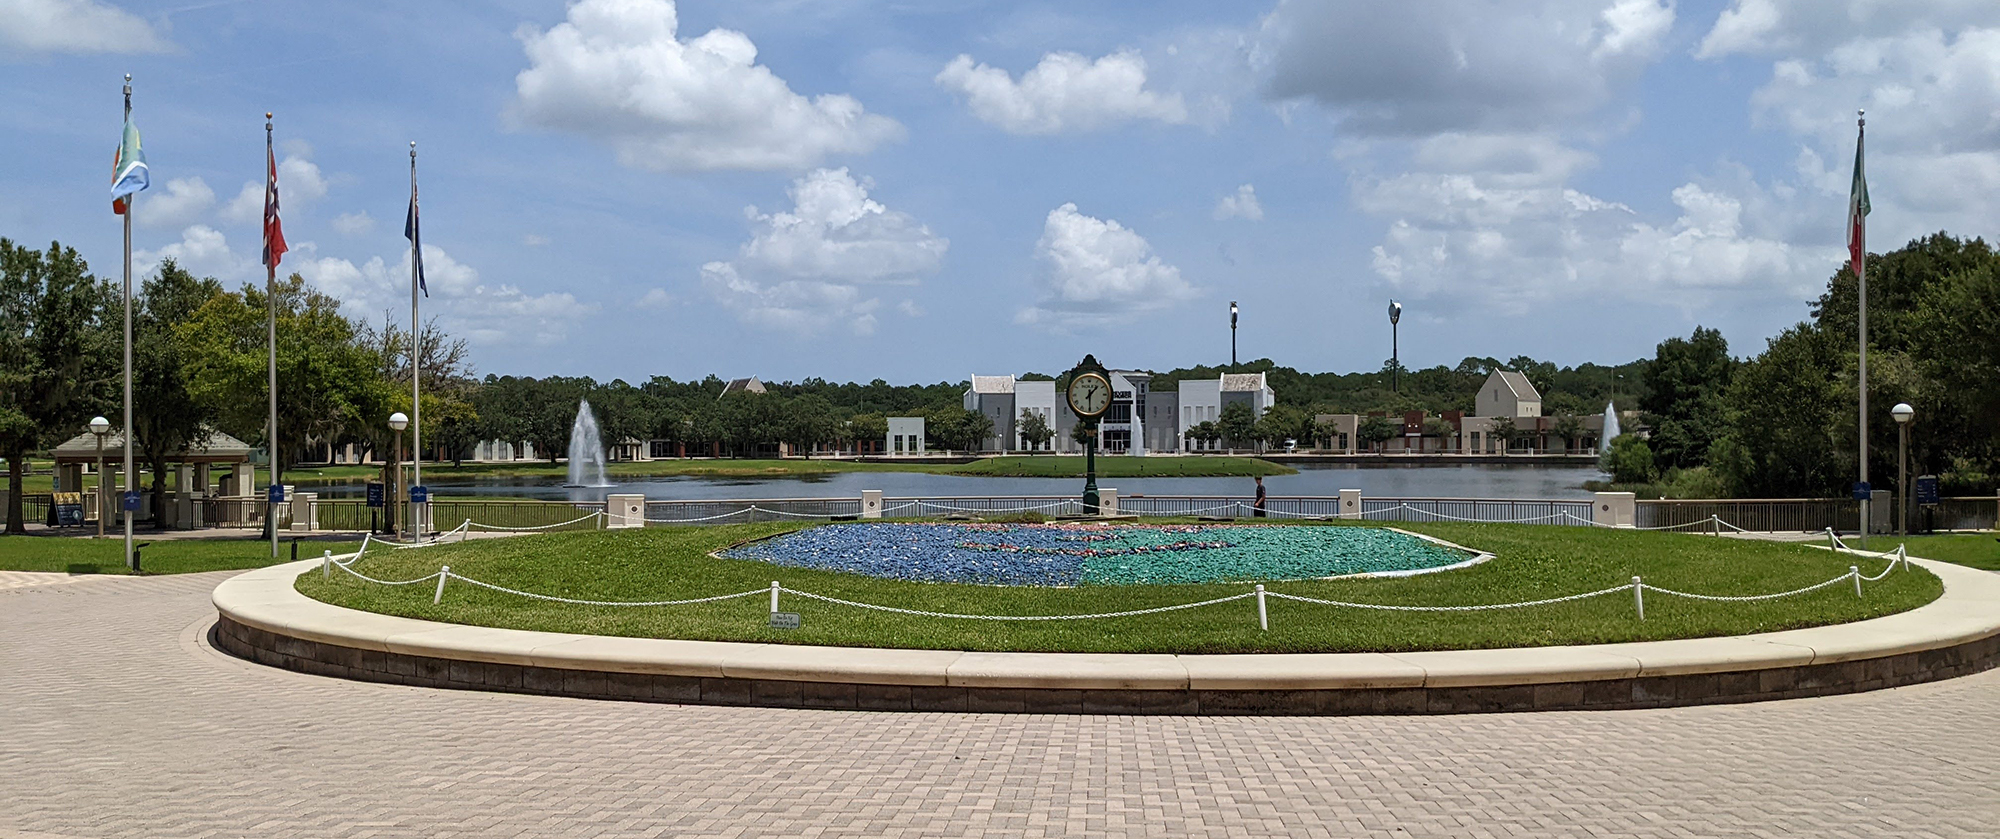 The entrance of World Golf Hall of Fame looking east. In the distance are the buildings that house Murray Bros. Caddyshack restaurant and Reverb Church.